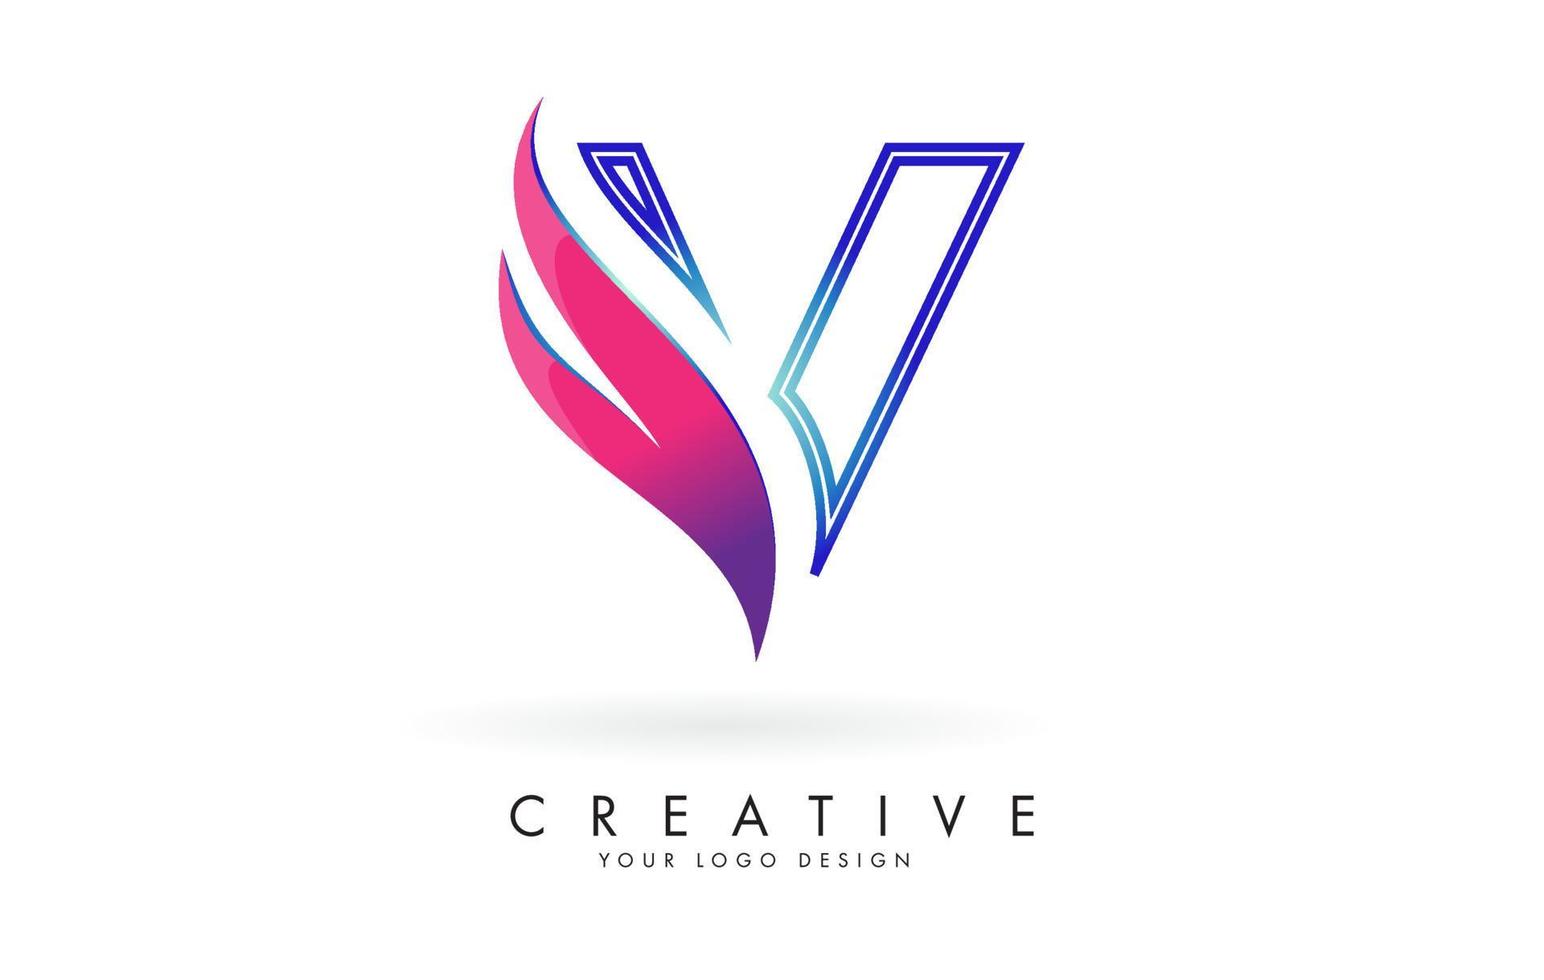 Outline Vector illustration of abstract letter V with colorful flames and gradient Swoosh design.